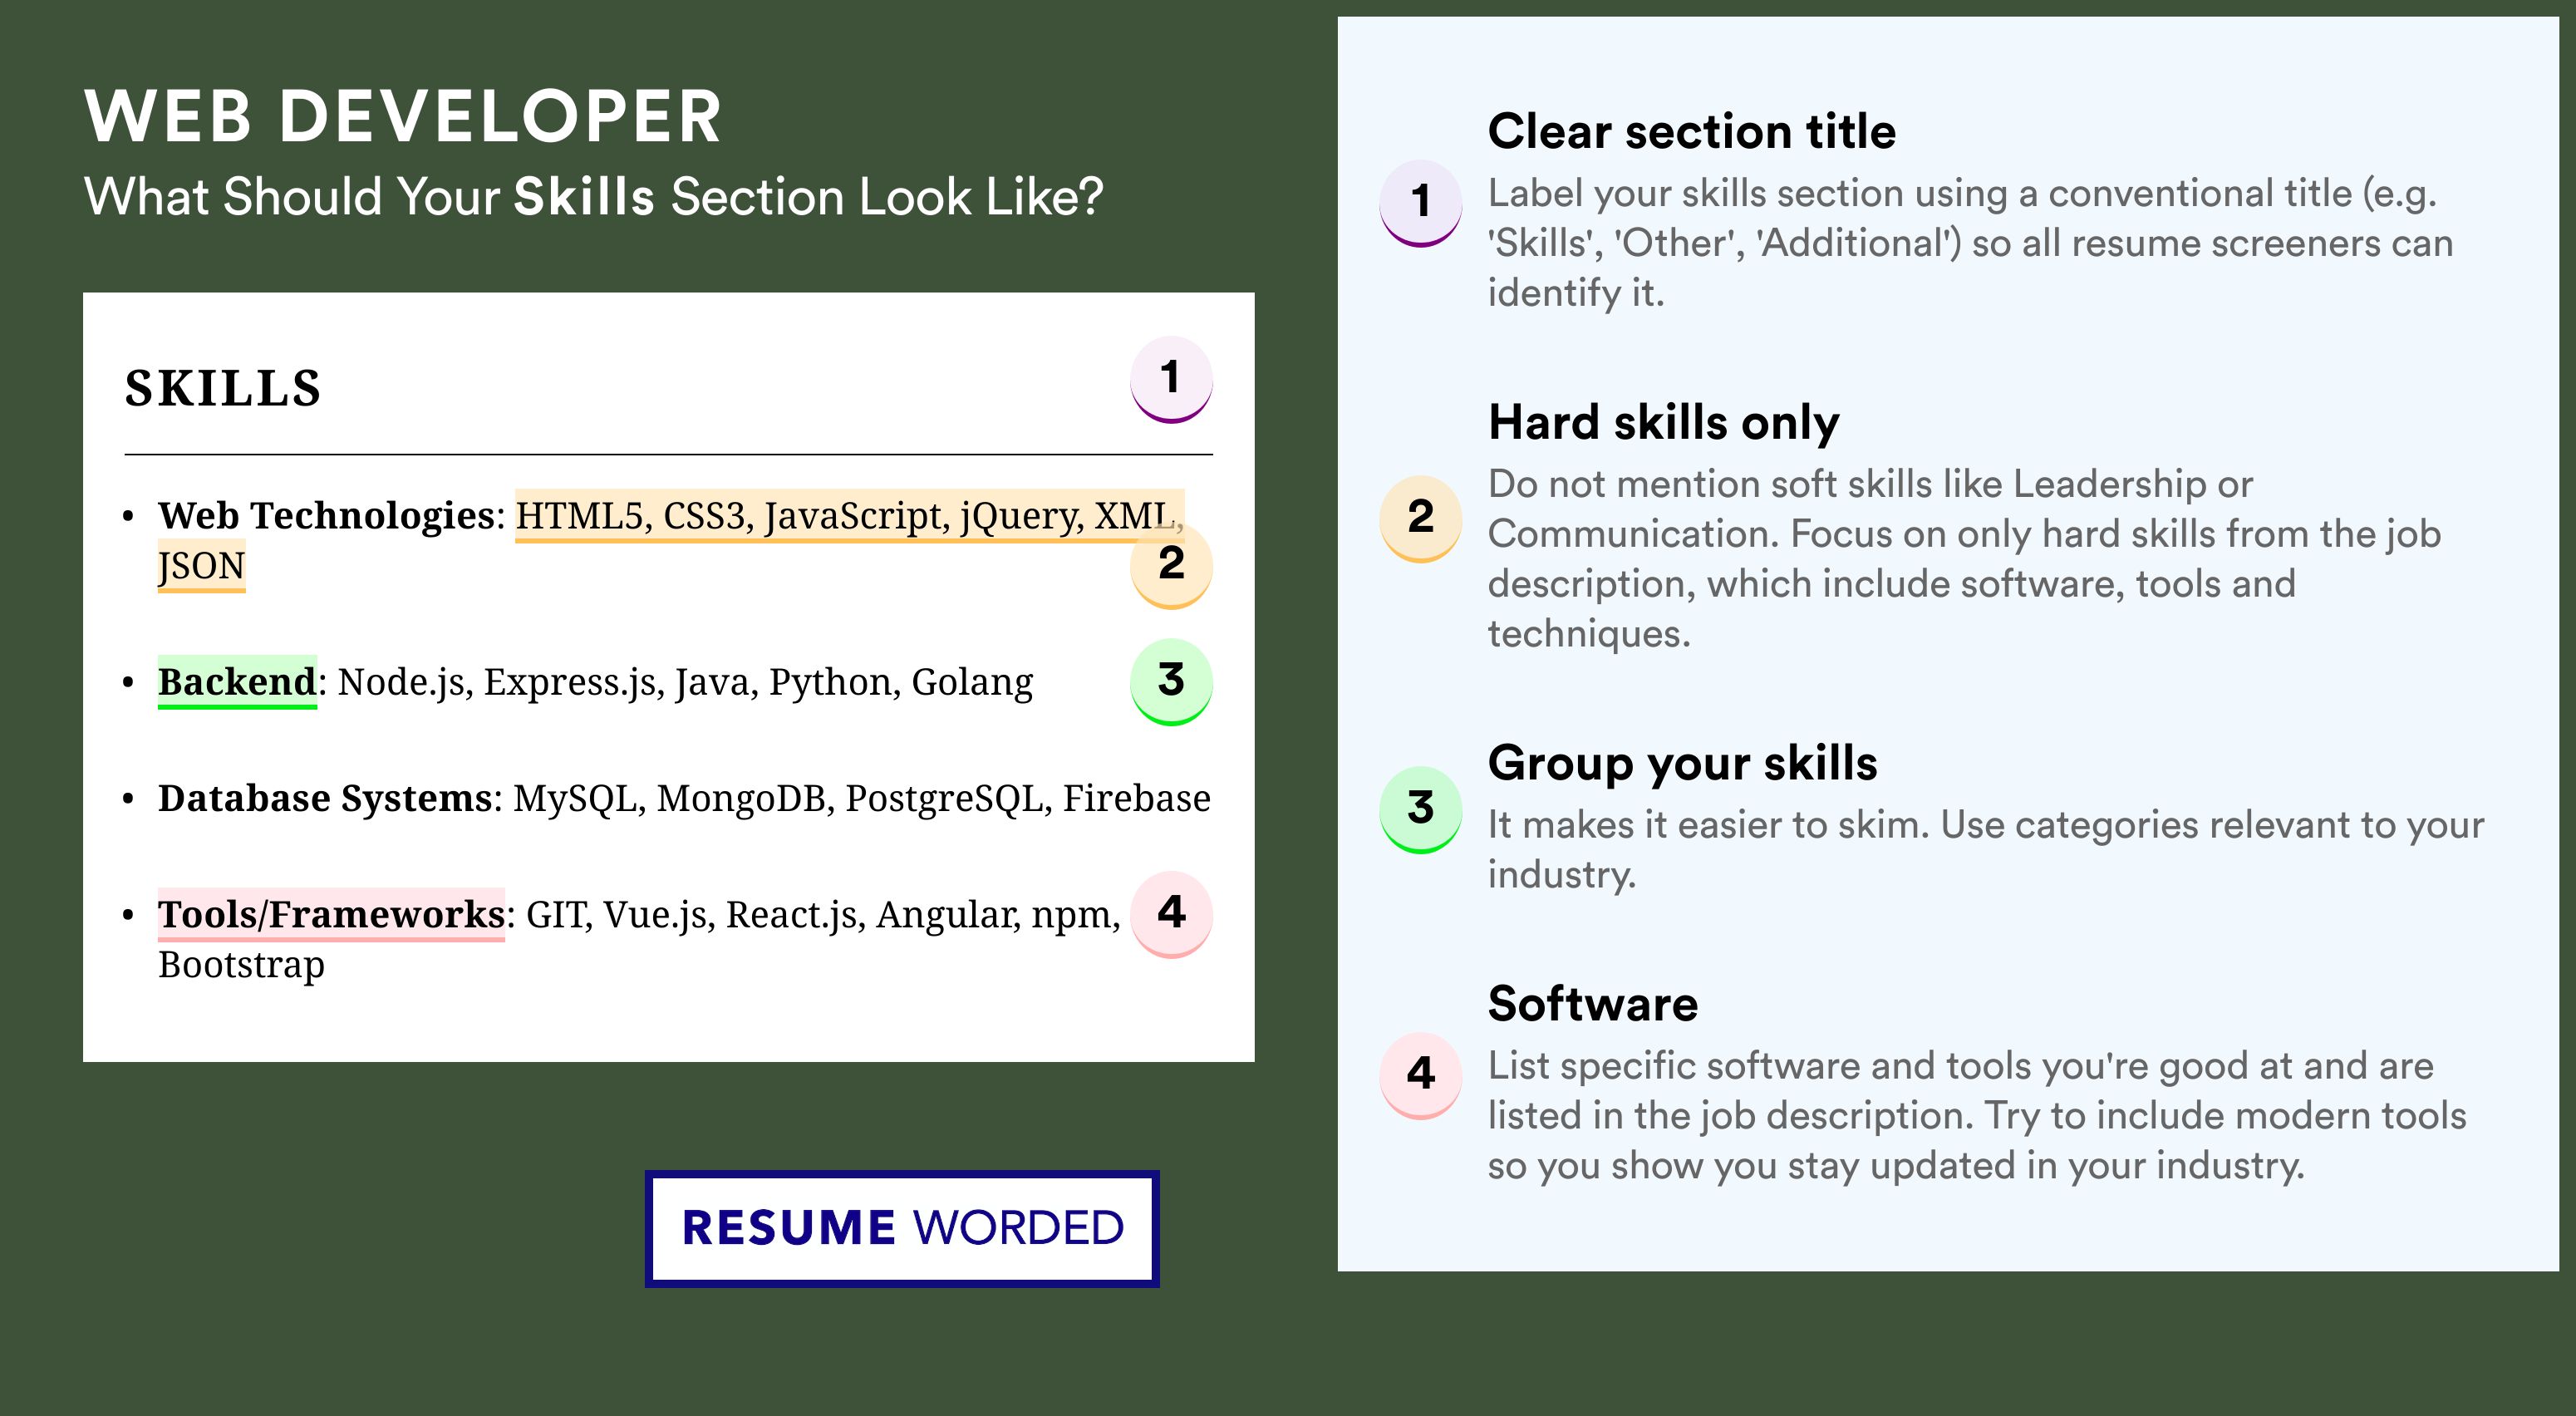 How To Write Your Skills Section - Web Developer Roles